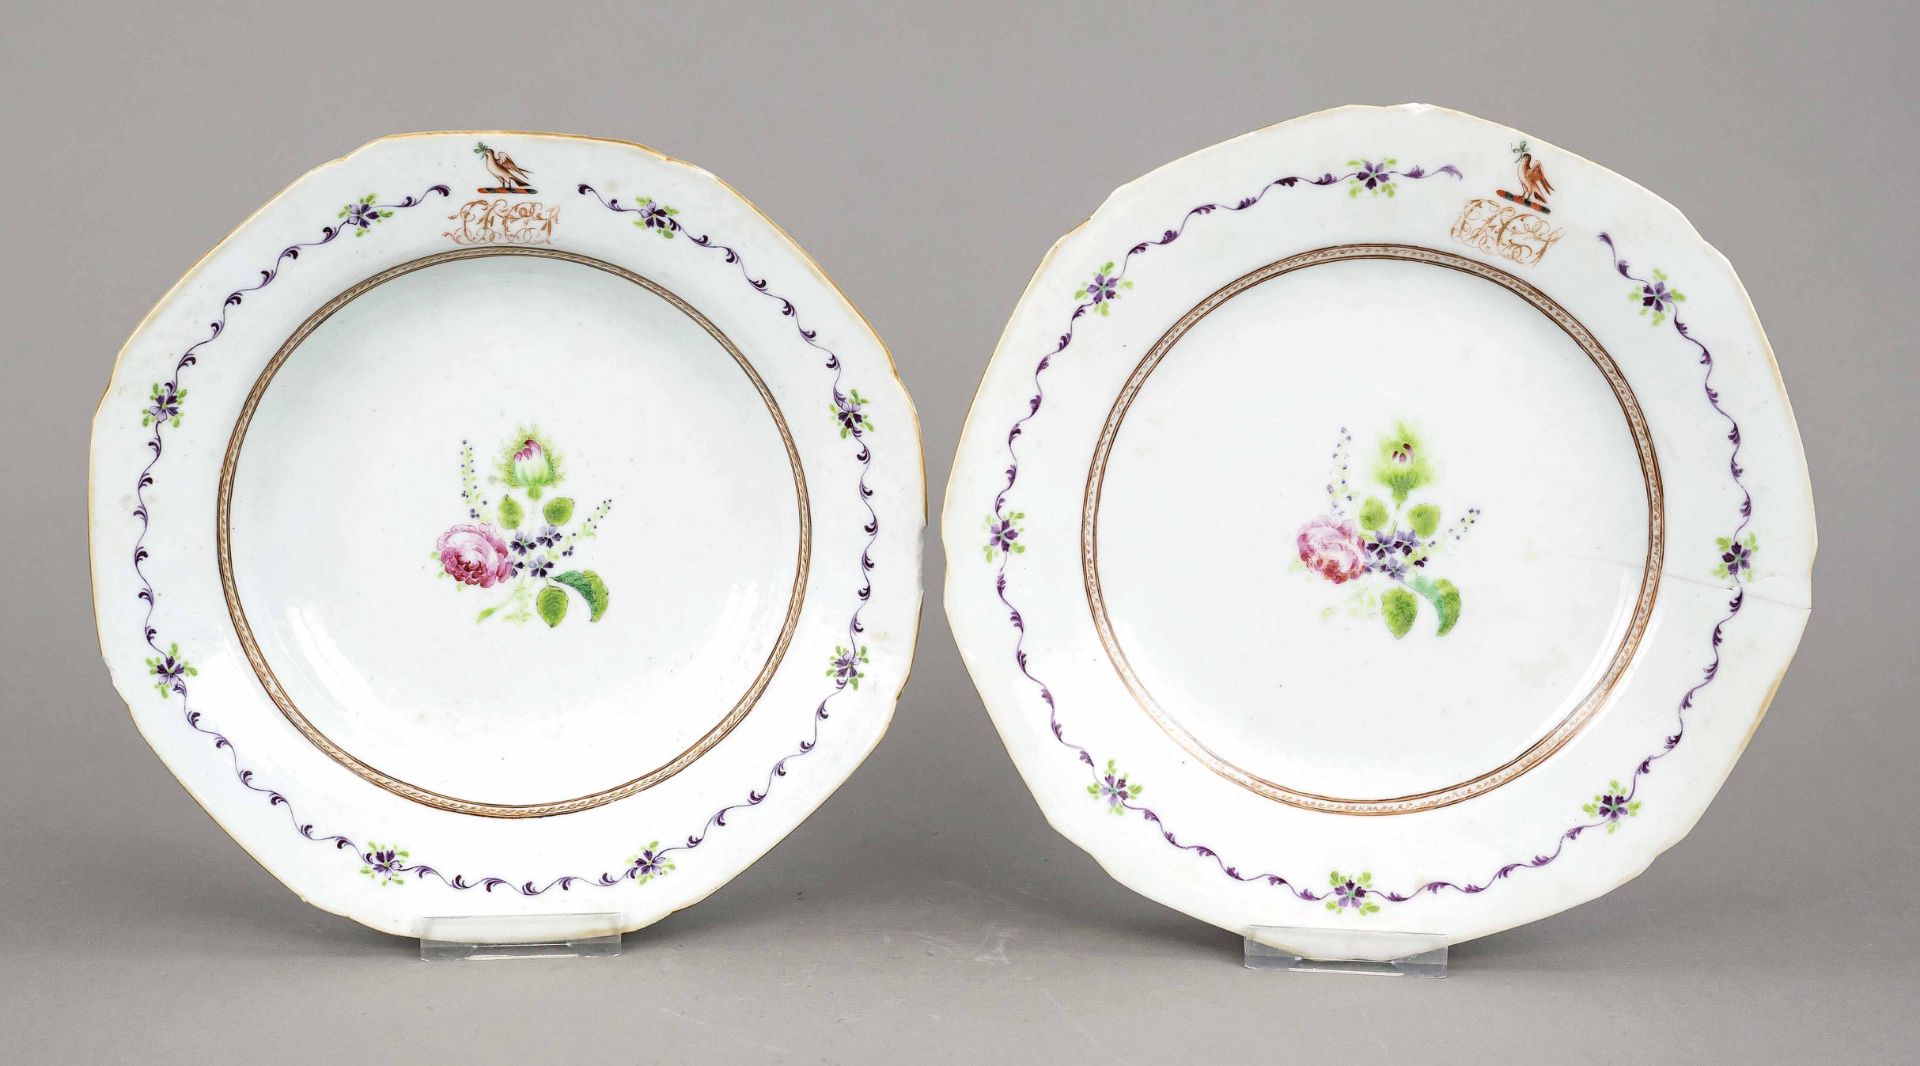 2 plates Commande de Chine, China, around 1800, porcelain with polychrome glaze painting and gold